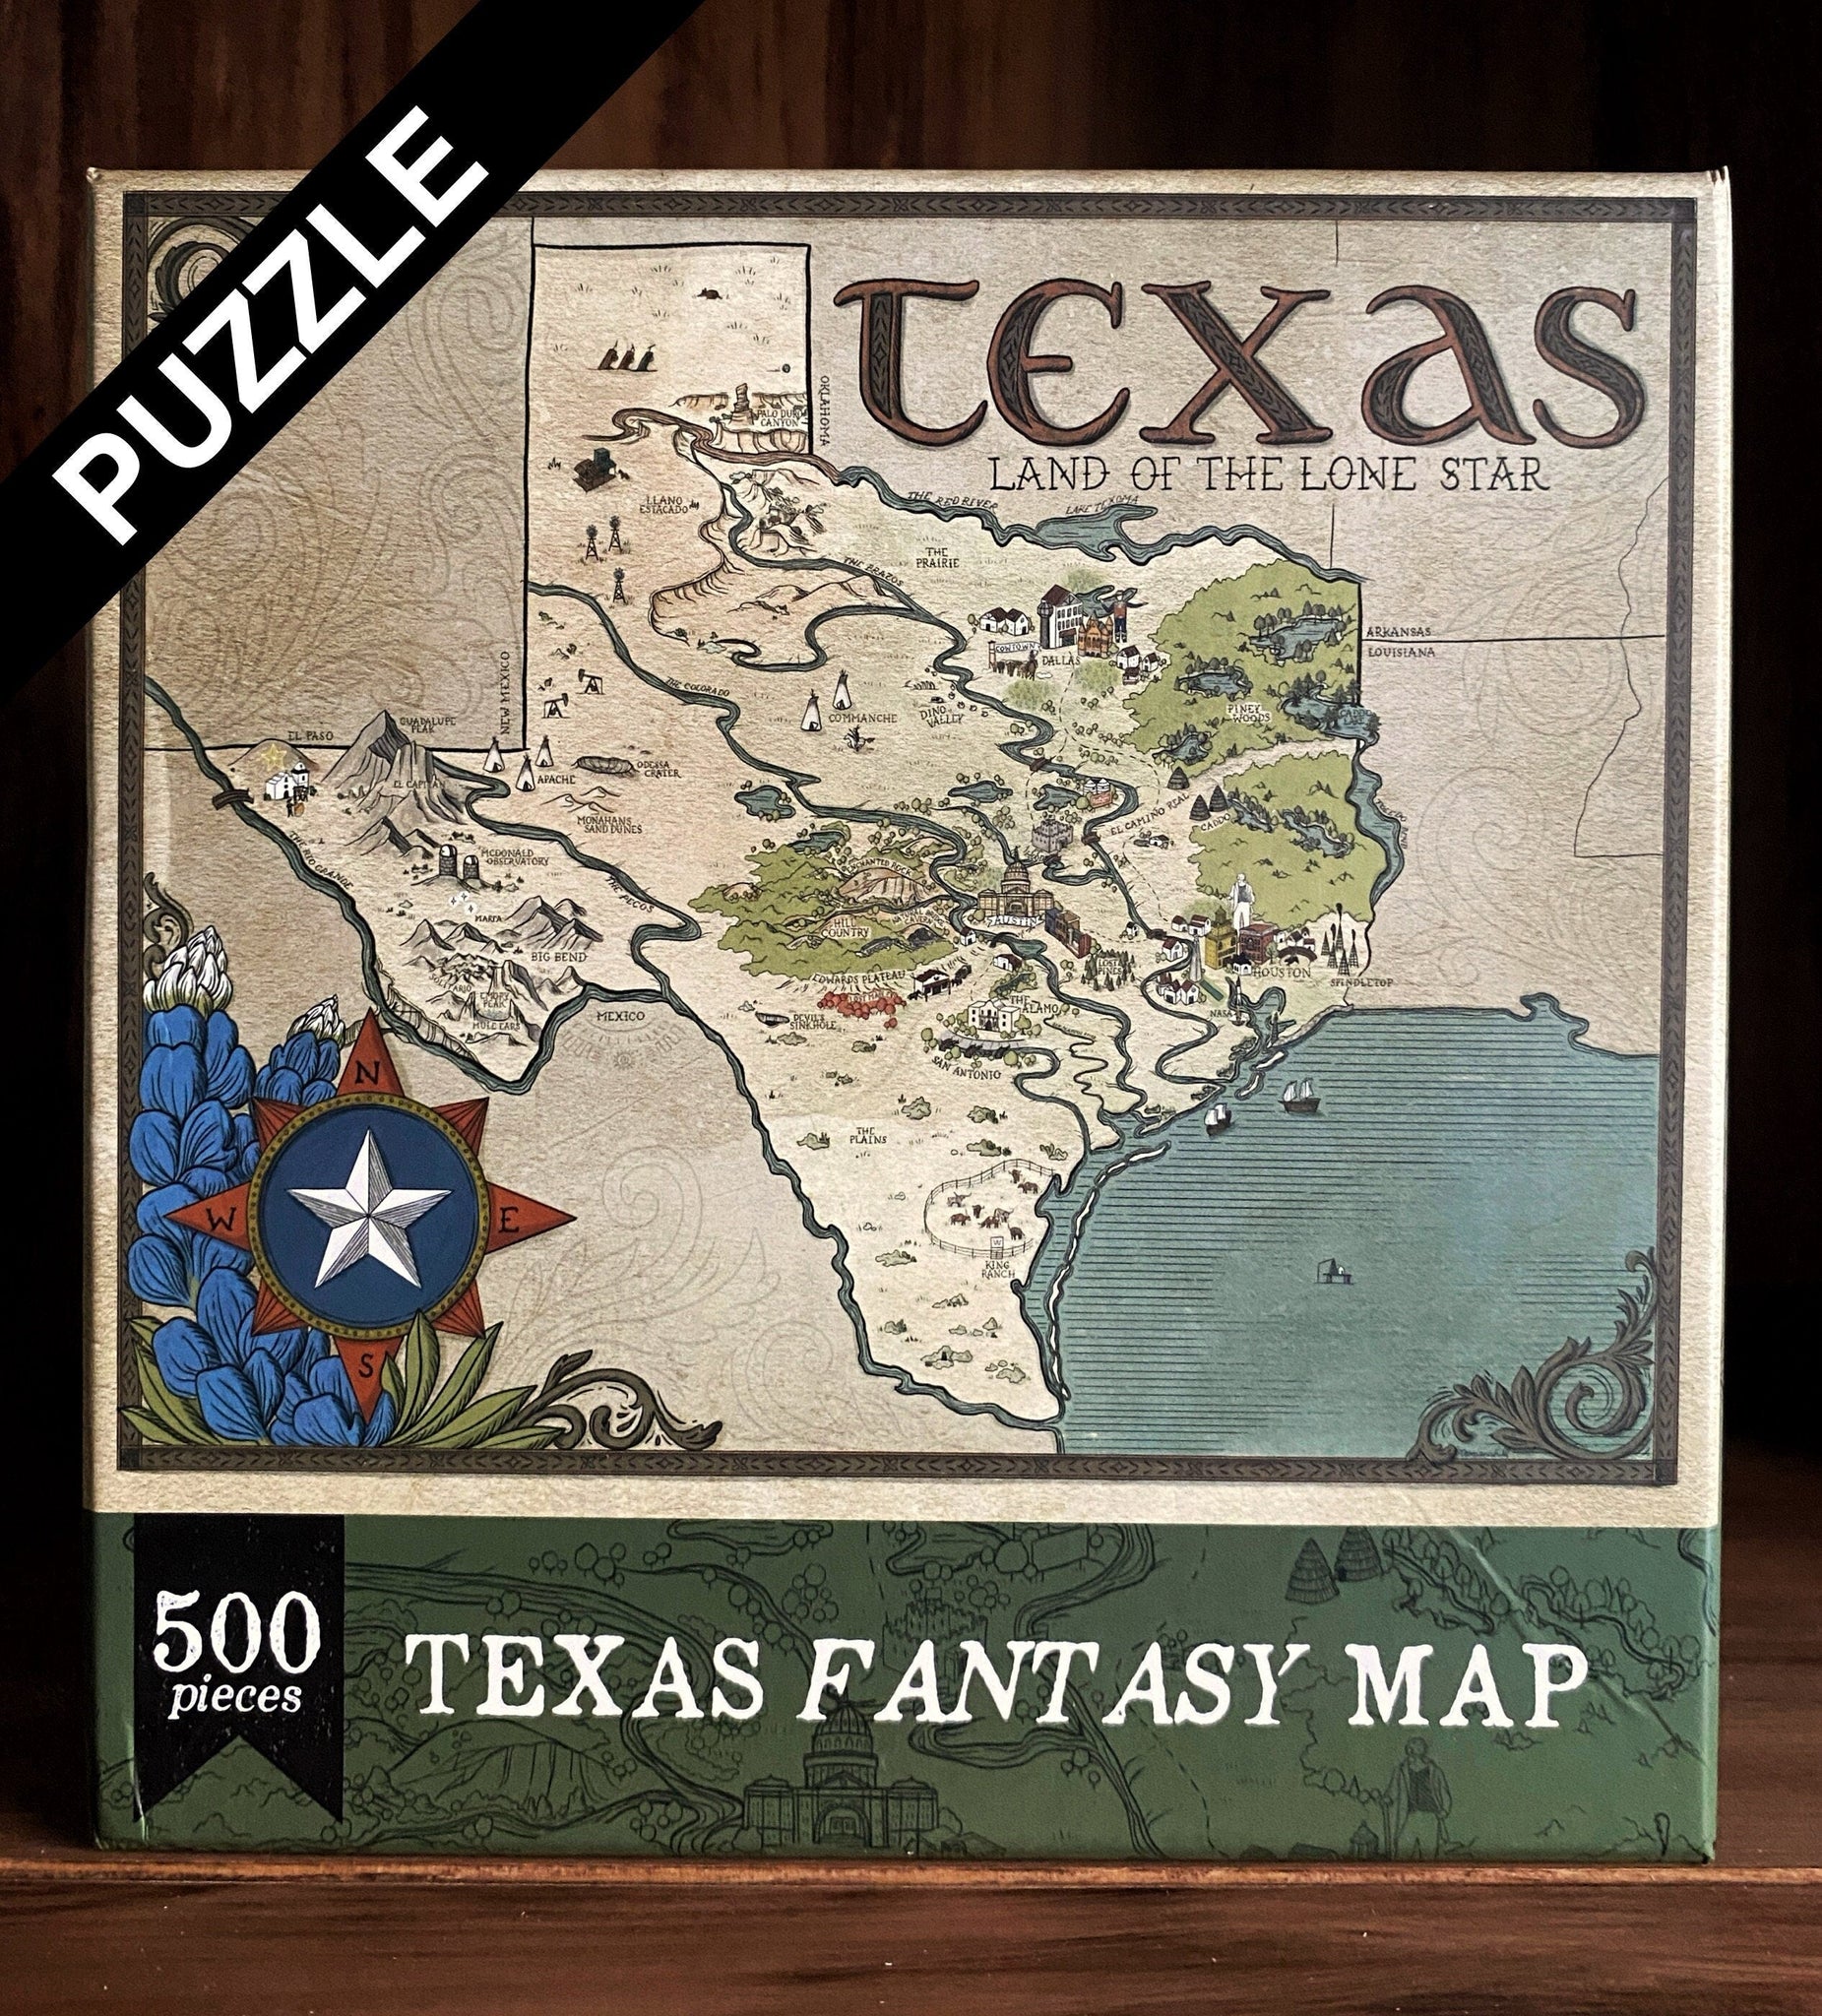 Image shows a 500 piece puzzle with a hand-drawn fantasy-style map of Texas